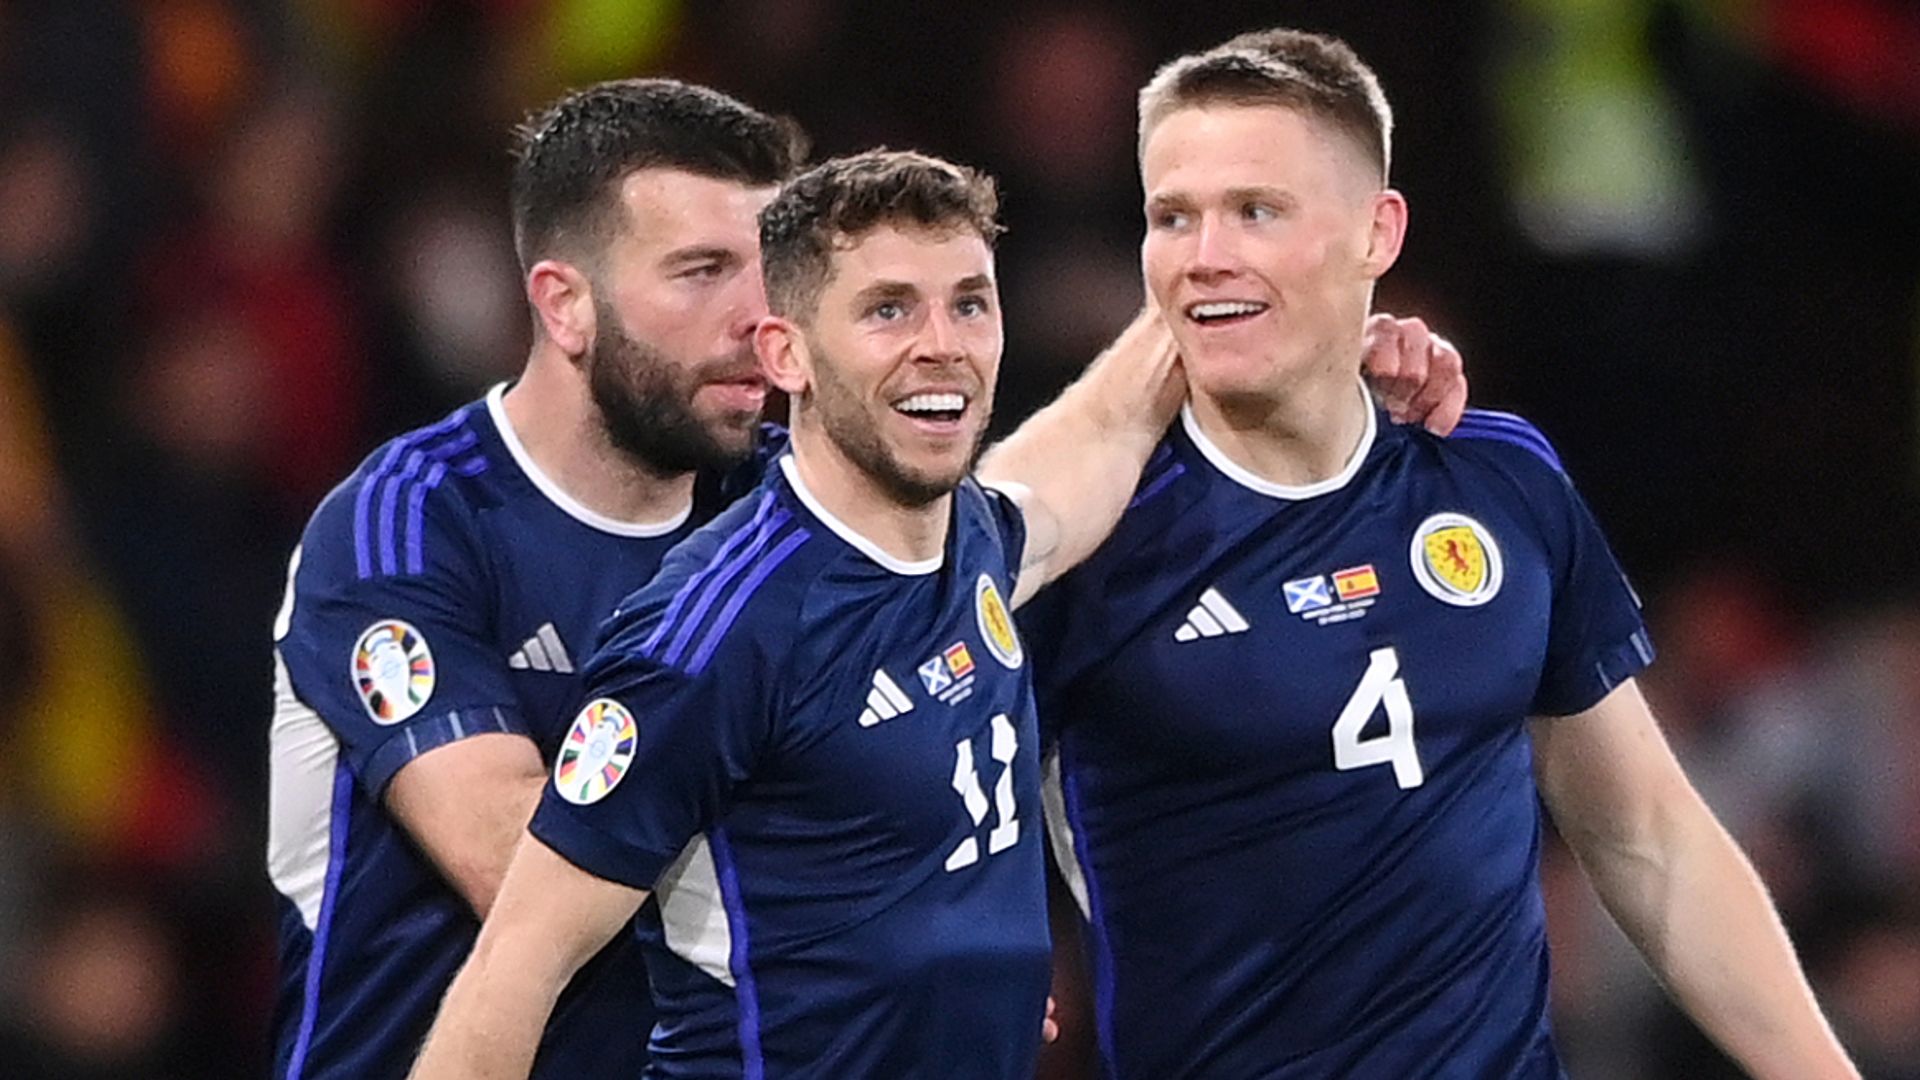 Clarke on Scotland's famous win: 'We have put a marker down'